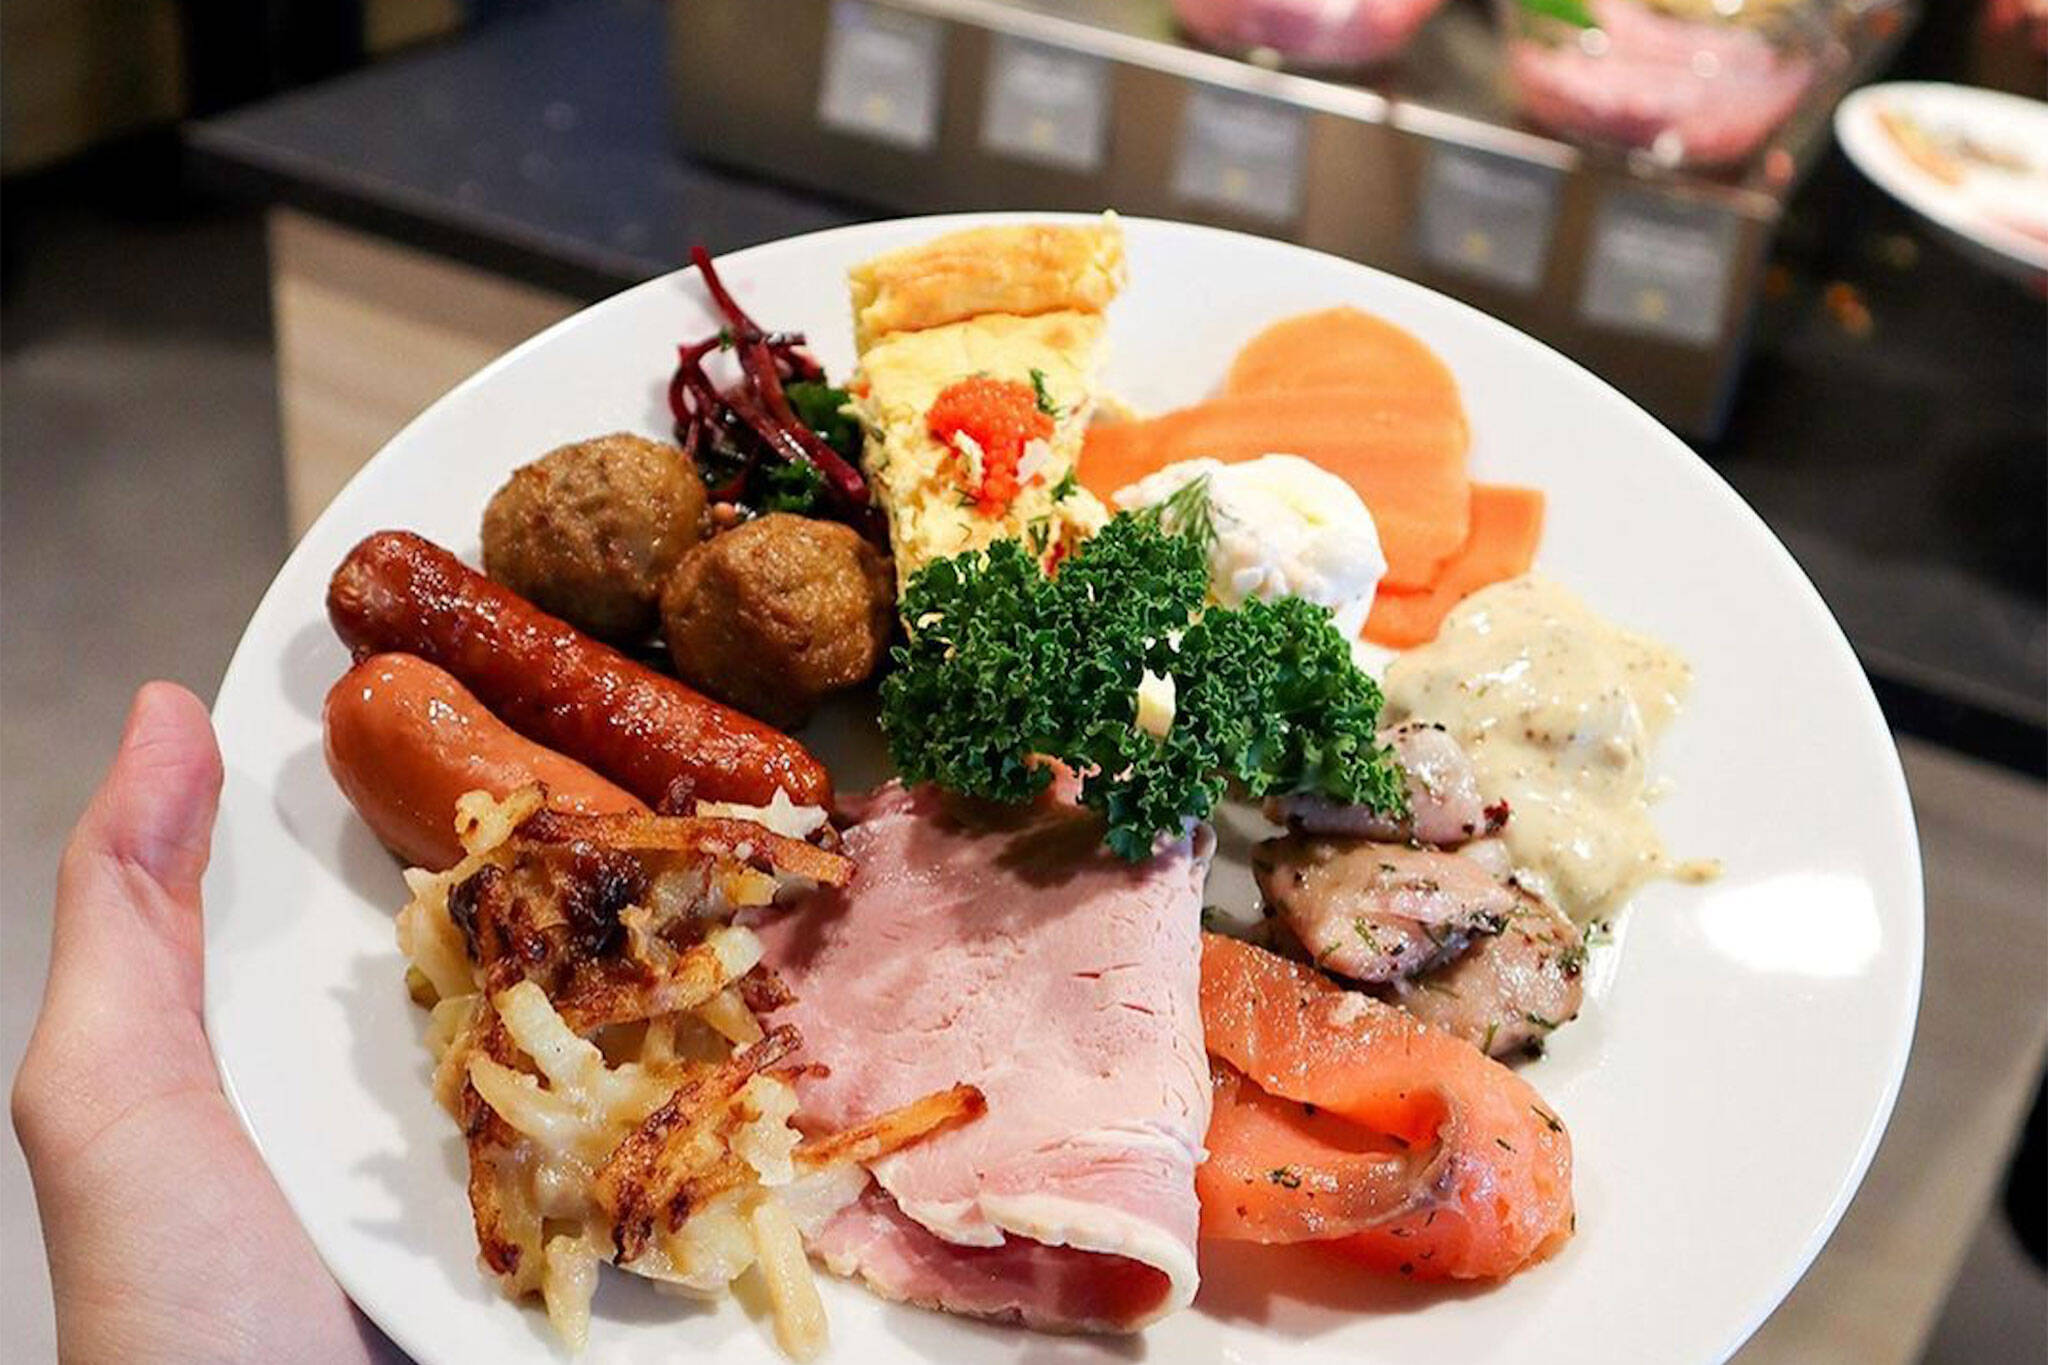 Ikea is offering an all you can eat Swedish holiday buffet in Toronto